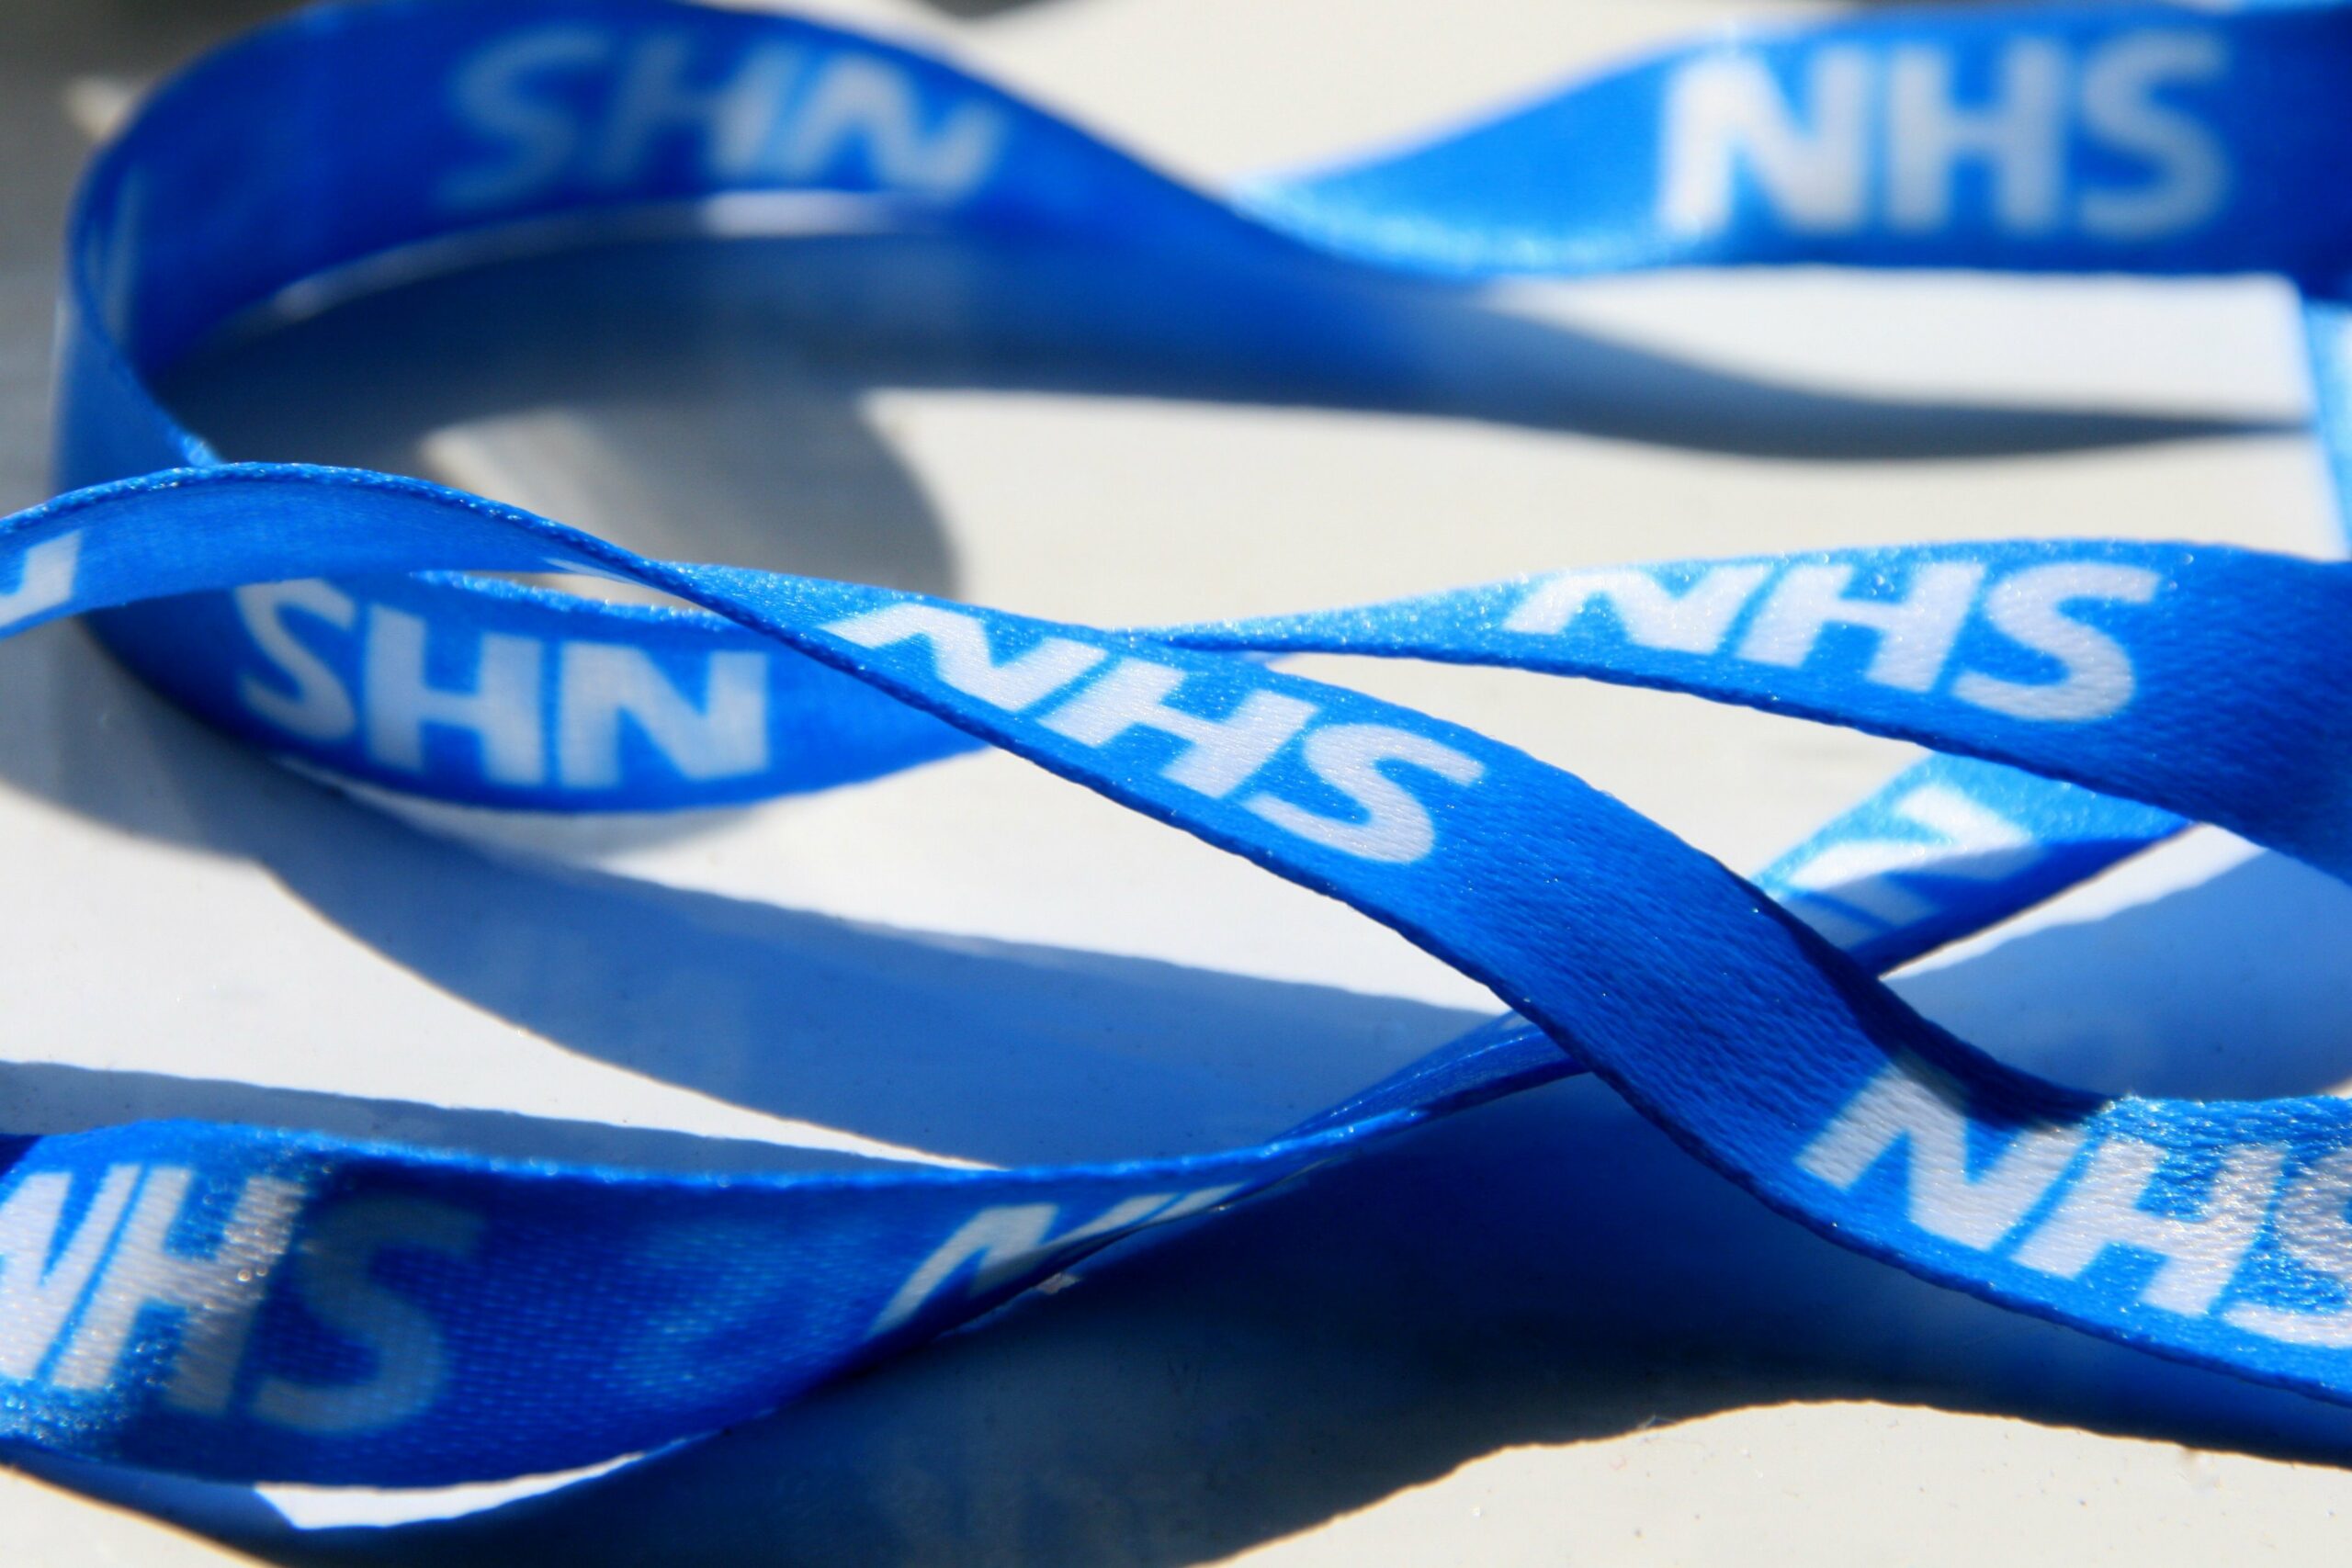 A blue lanyard with NHS printed on it laying on a grey table